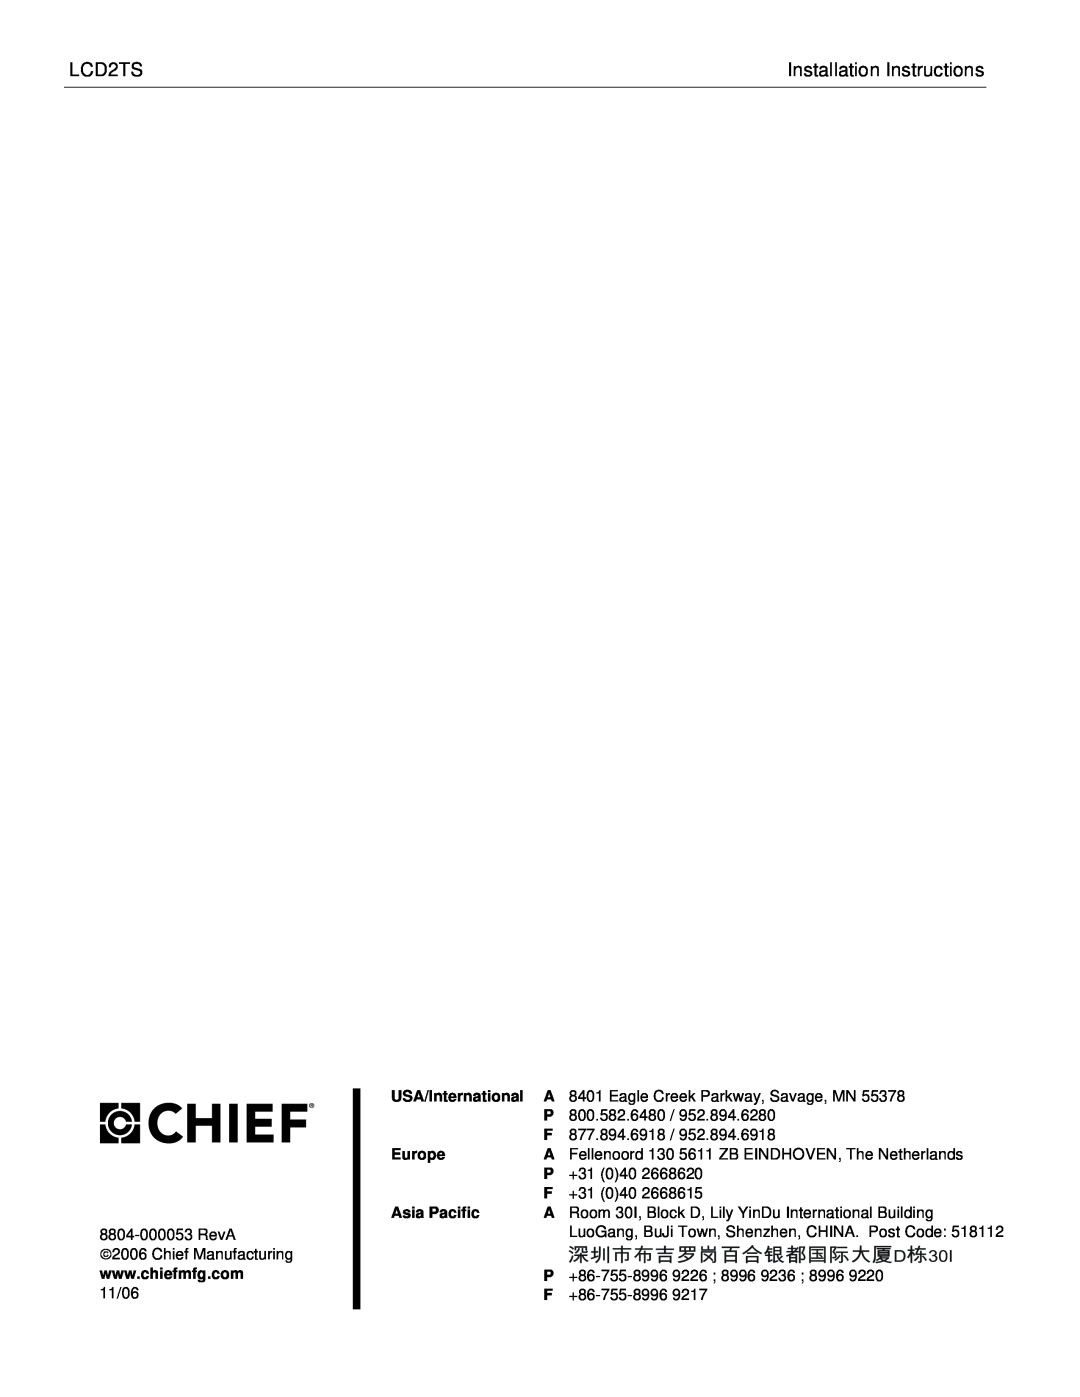 Chief Manufacturing LCD2TS installation instructions Installation Instructions, USA/International 